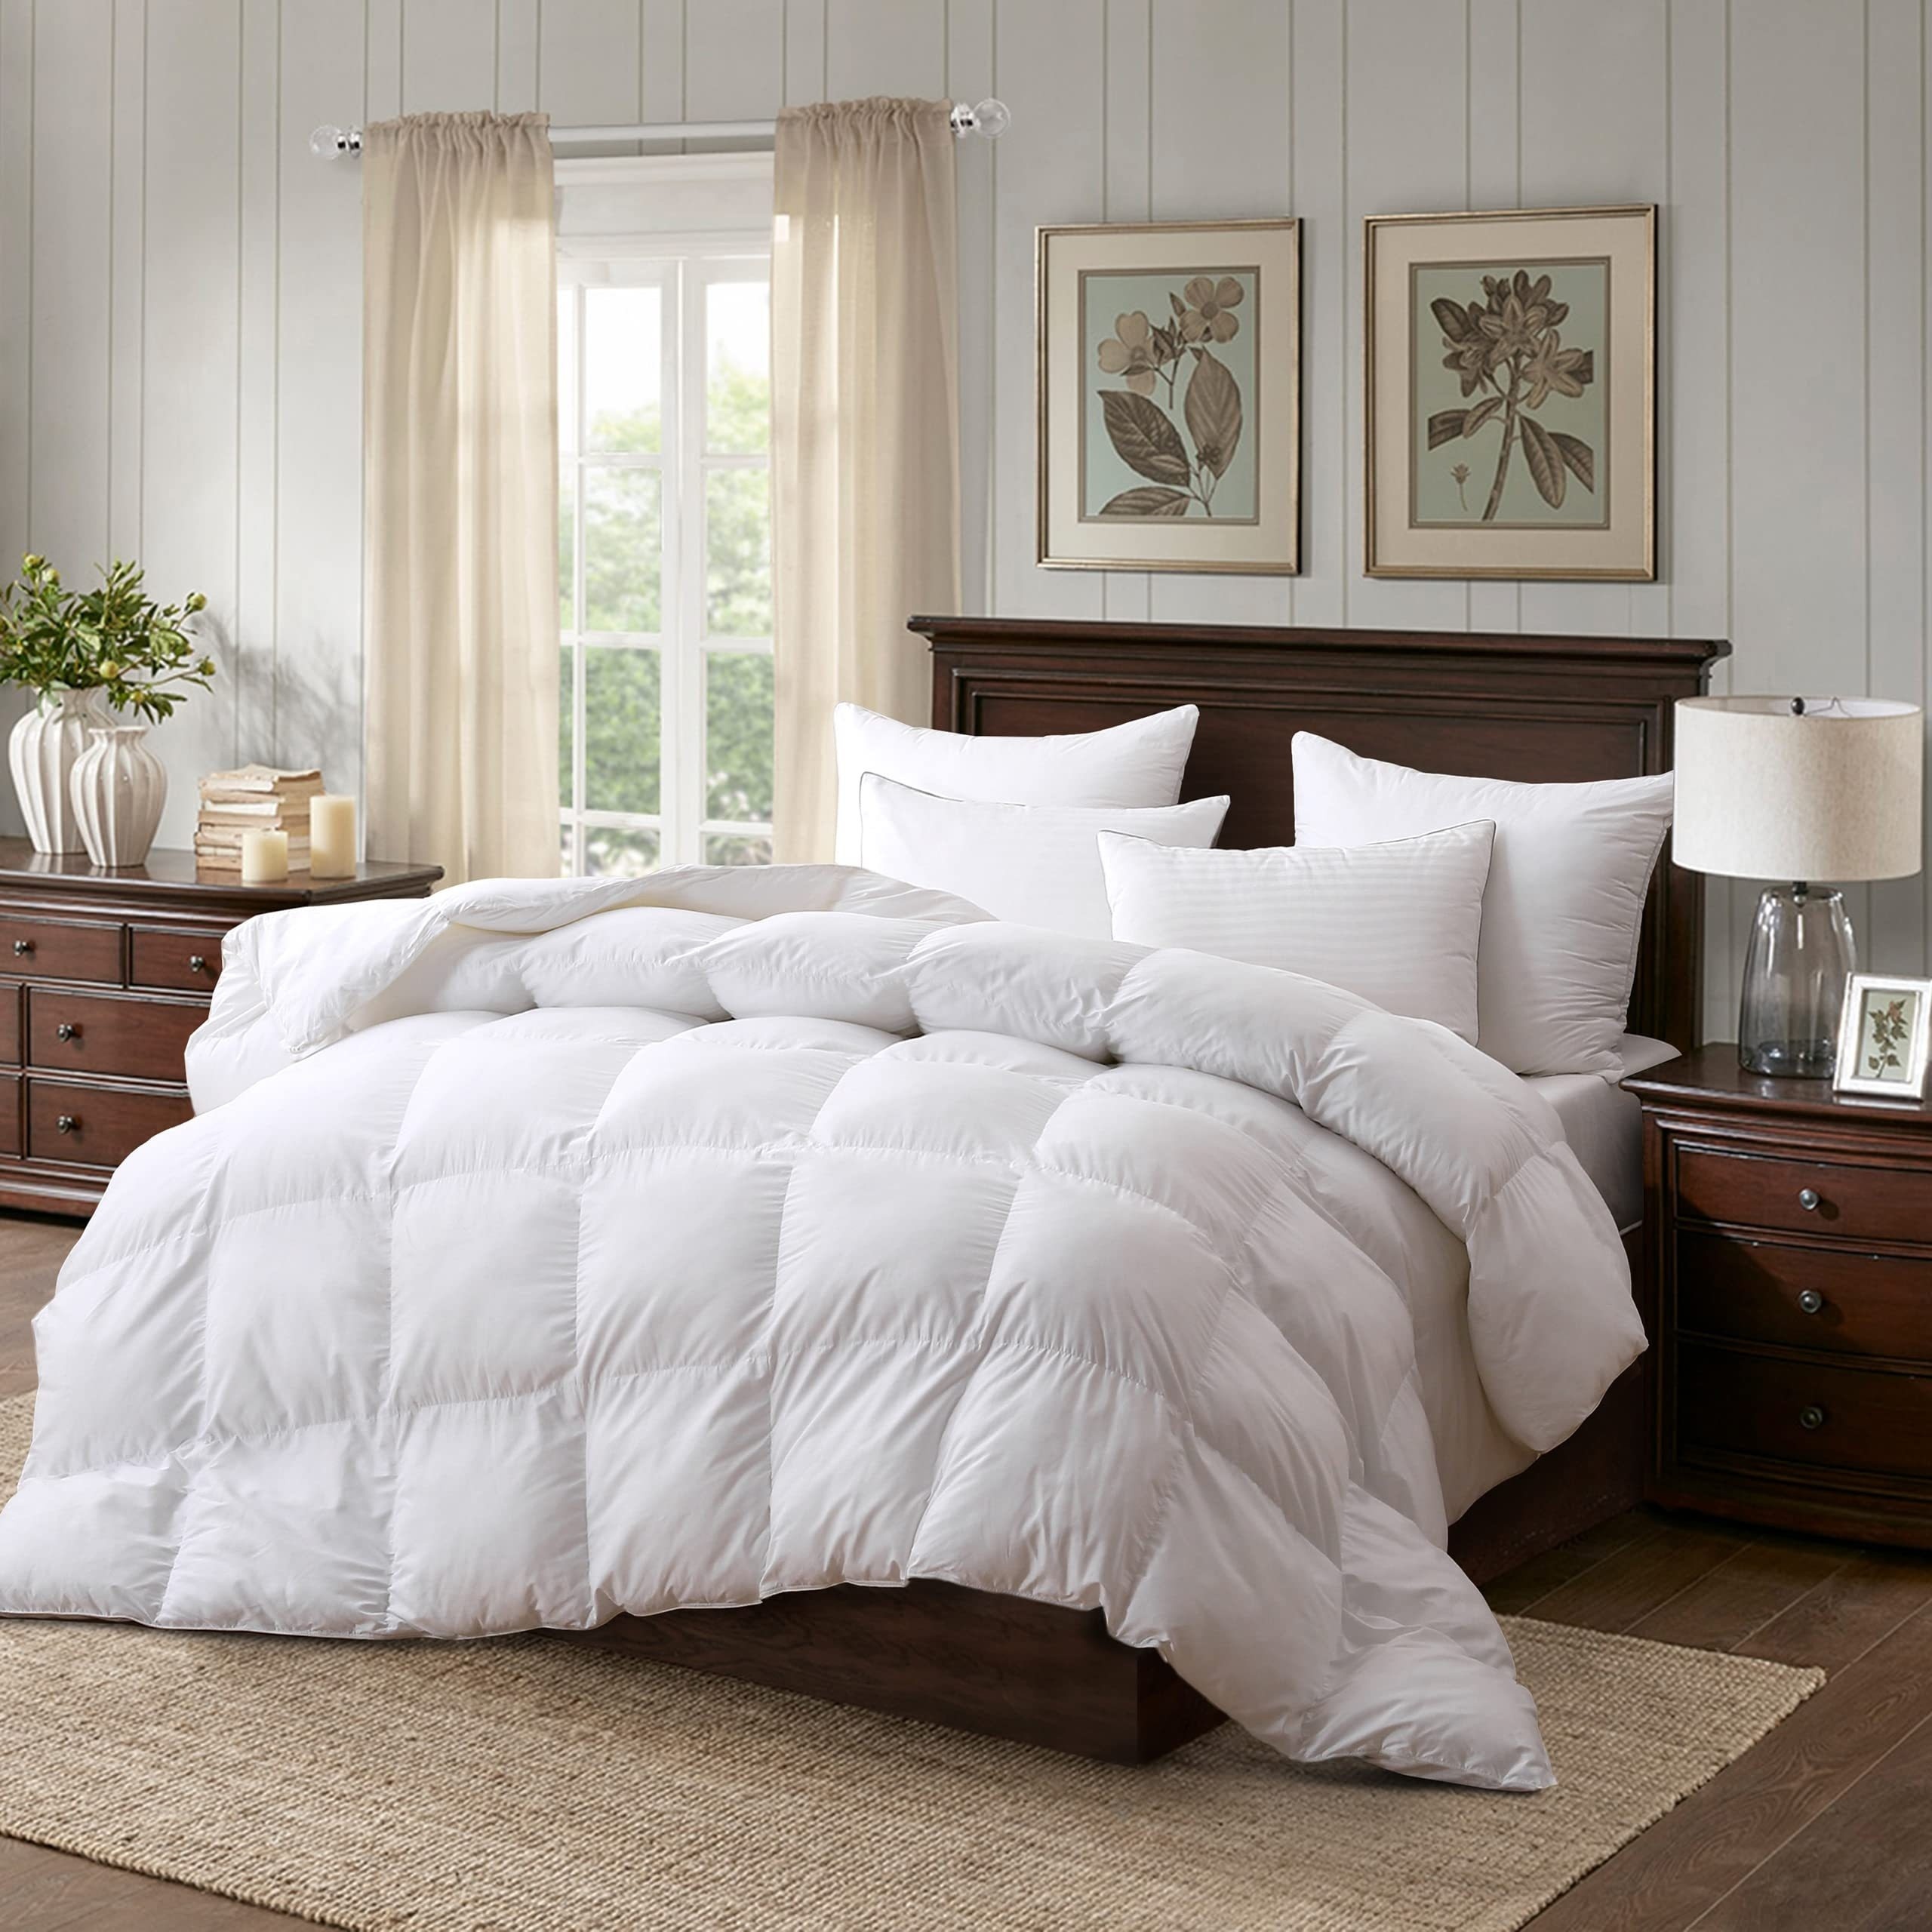 

Goose Down And Feather Fiber Bedding Comforter Soft Duvet Insert With Cotton Fabric Baffle Box Stitching Comforter